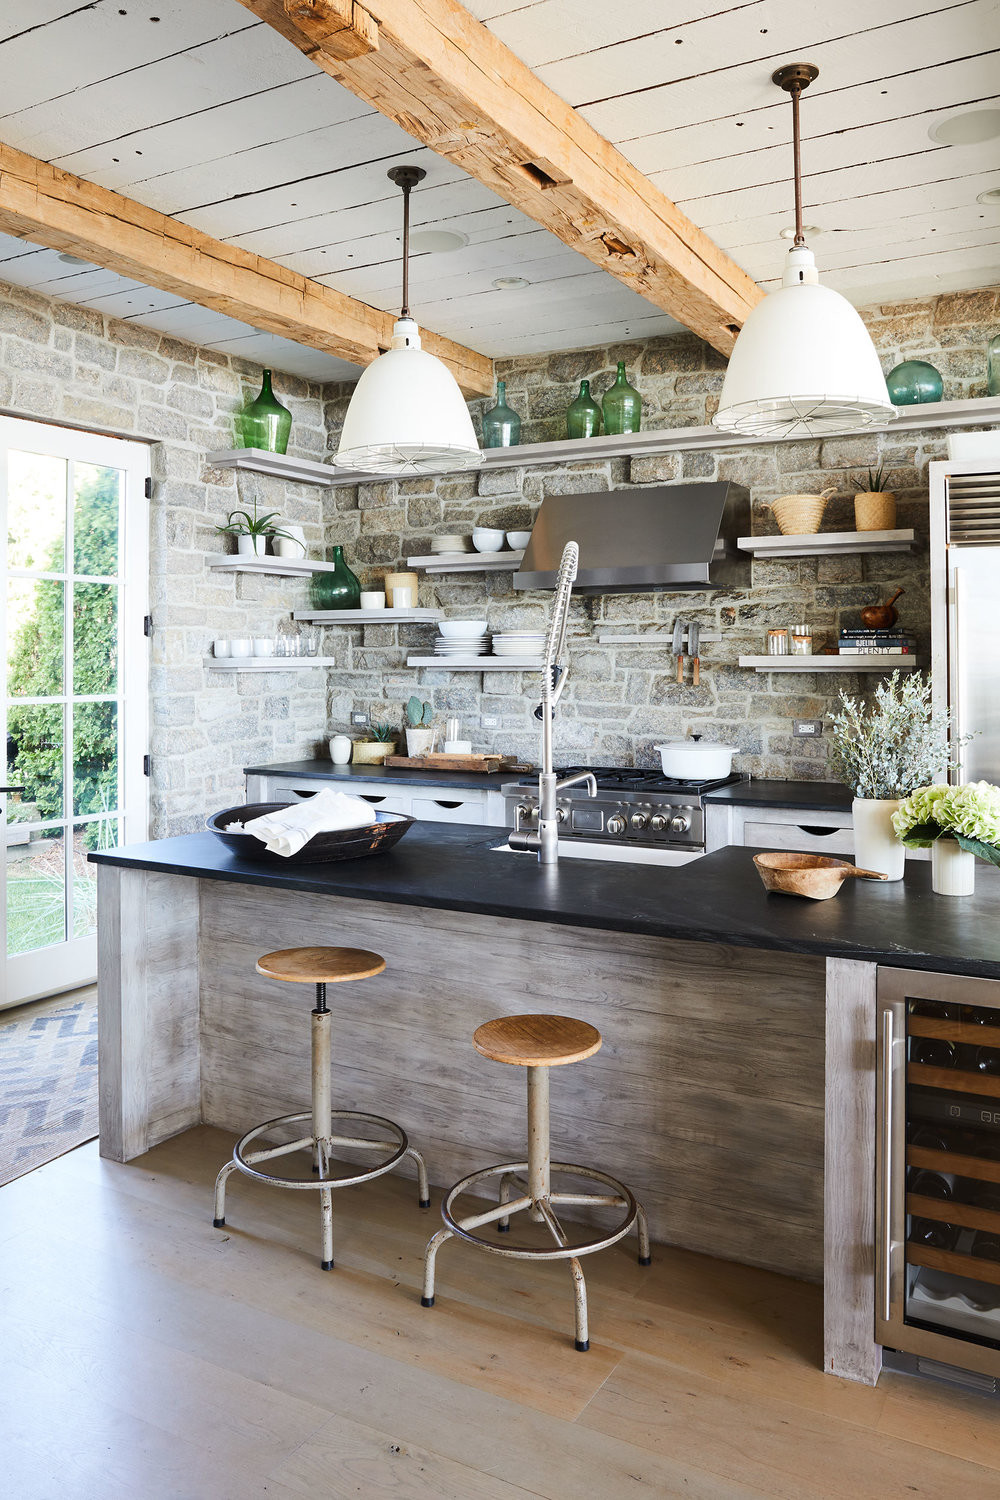 Rustic Kitchen Themes
 15 Best Rustic Kitchens Modern Country Rustic Kitchen